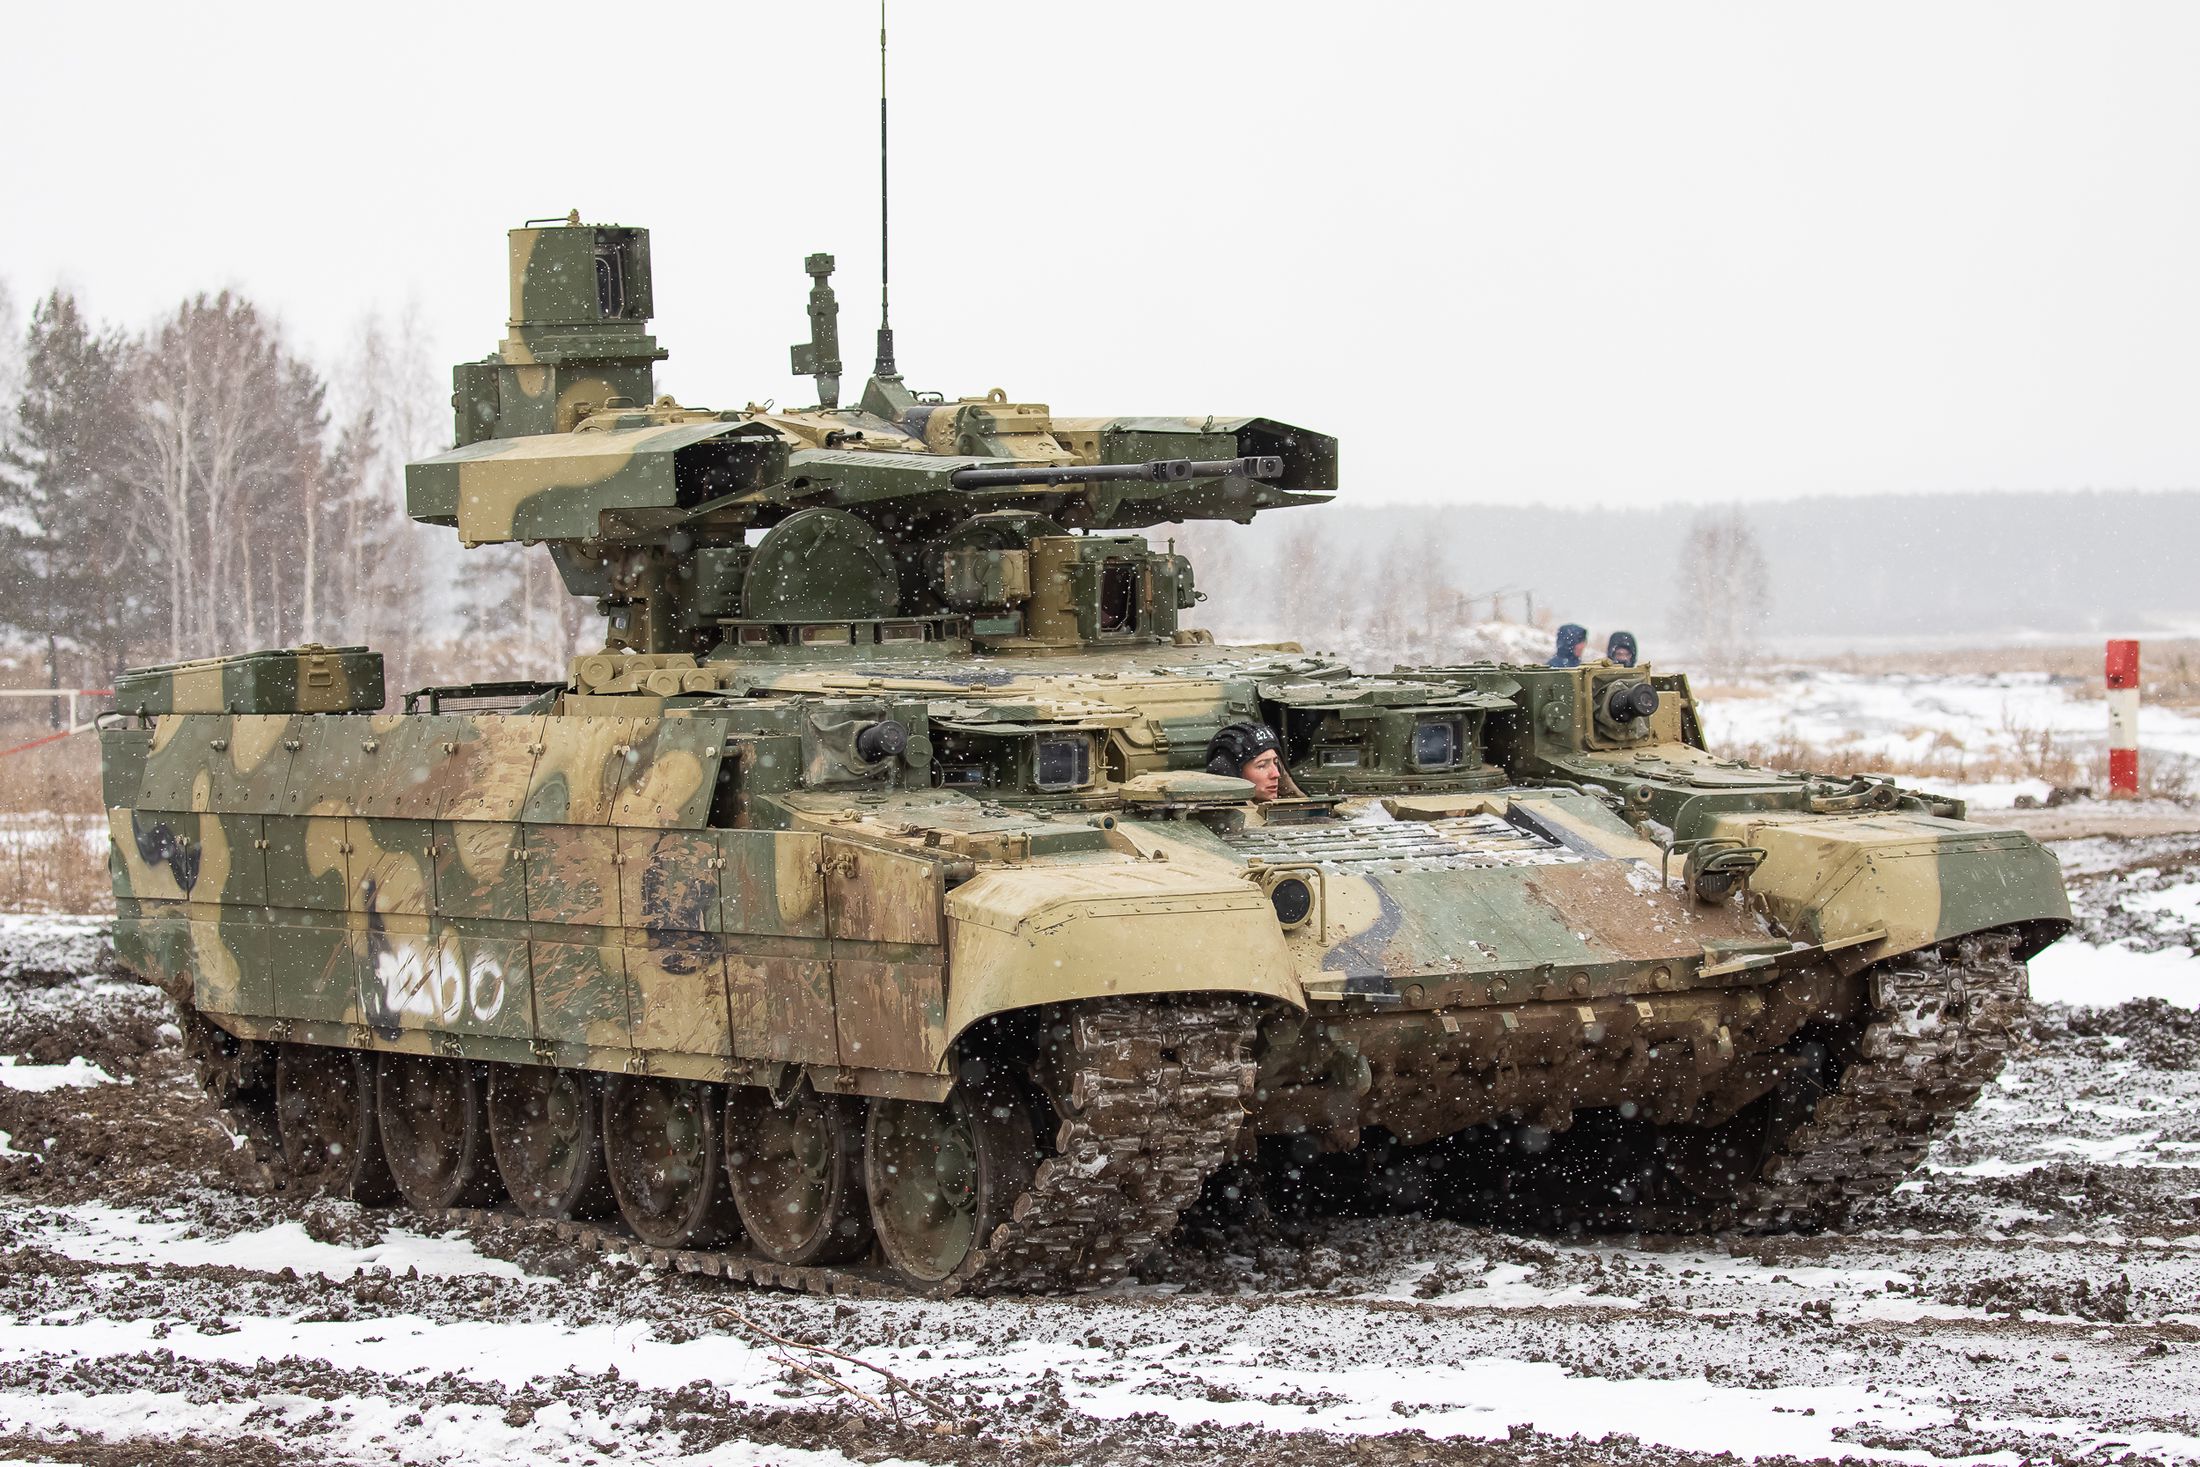 Explained: What is Russia's Terminator tank support system, now